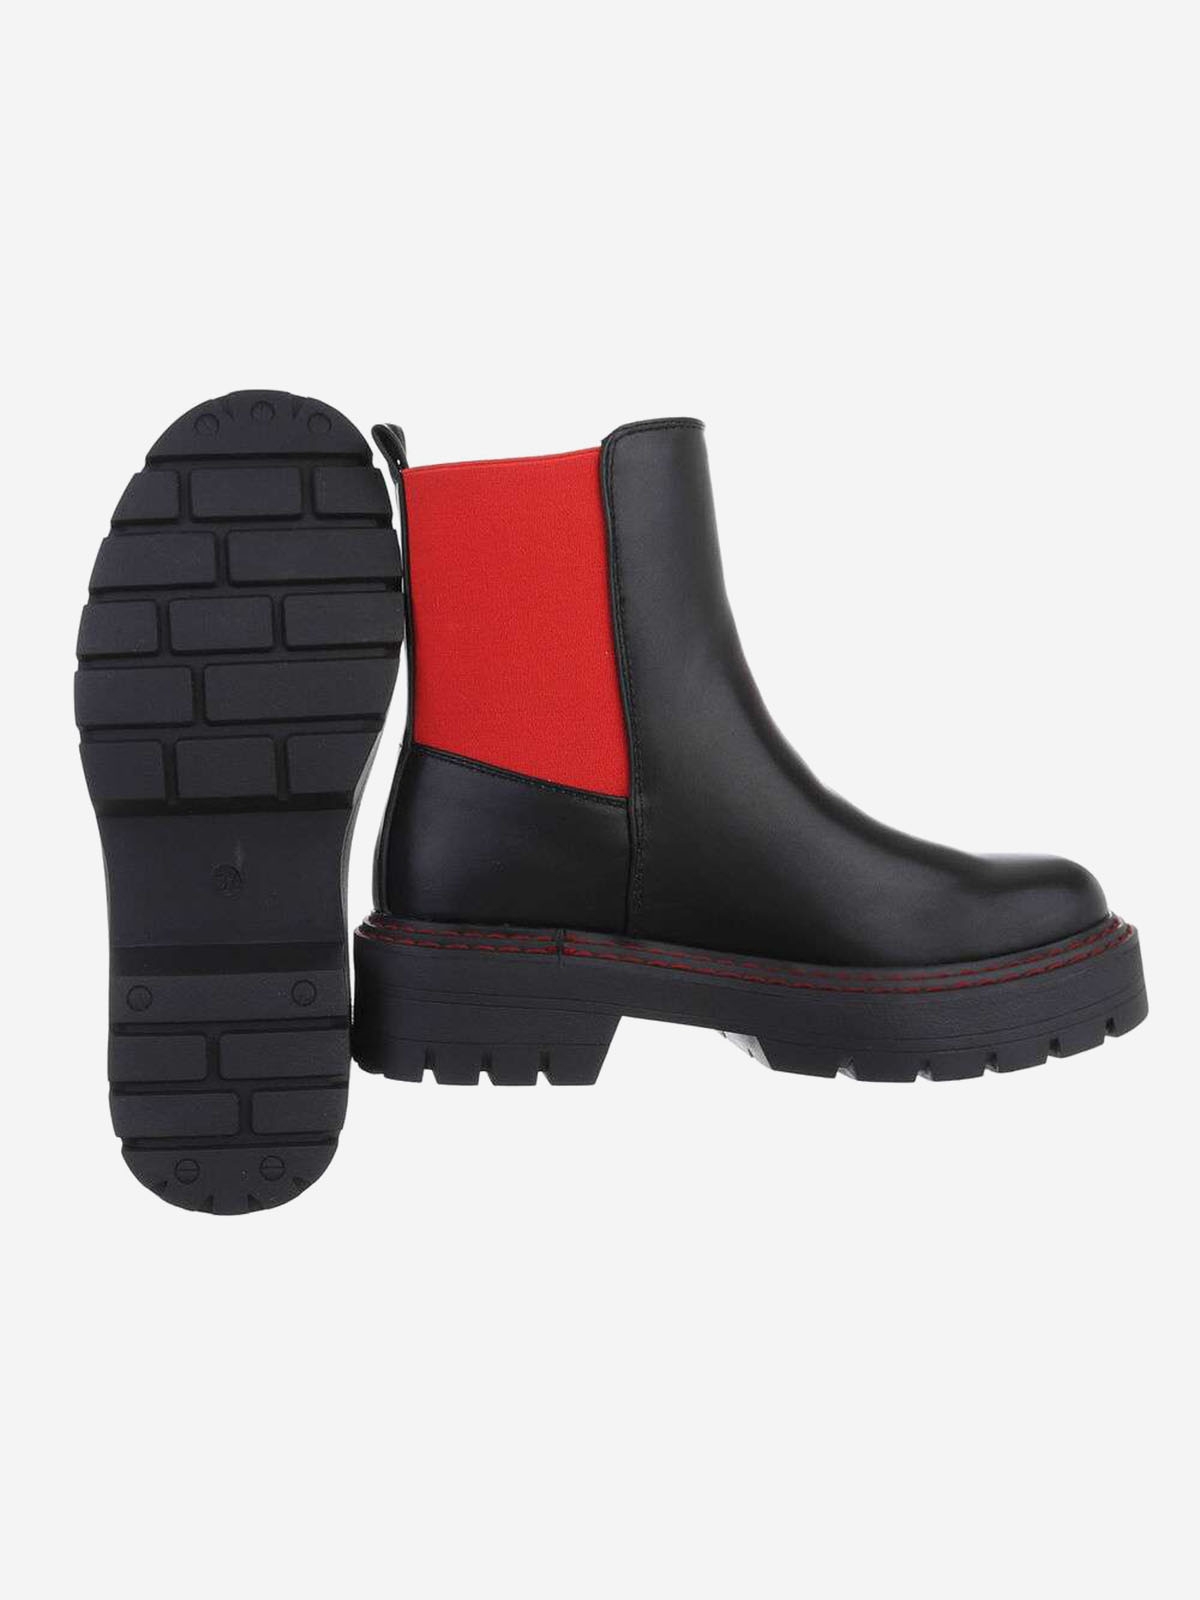 "Chelsea" women's ankle boots with red details